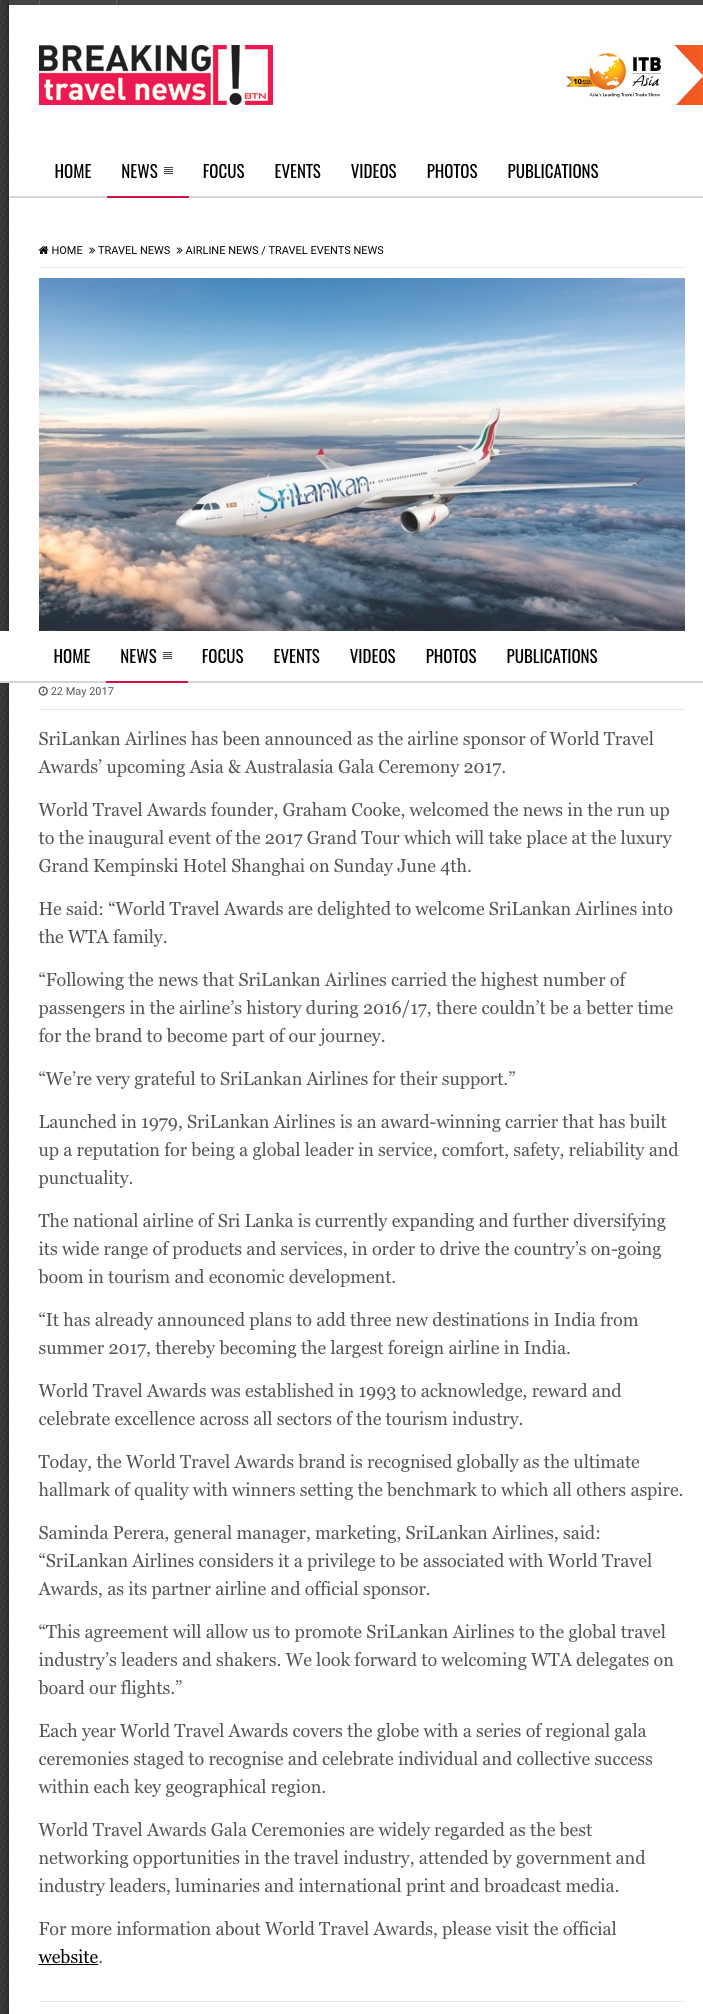 World Travel Awards partners with SriLankan Airlines 